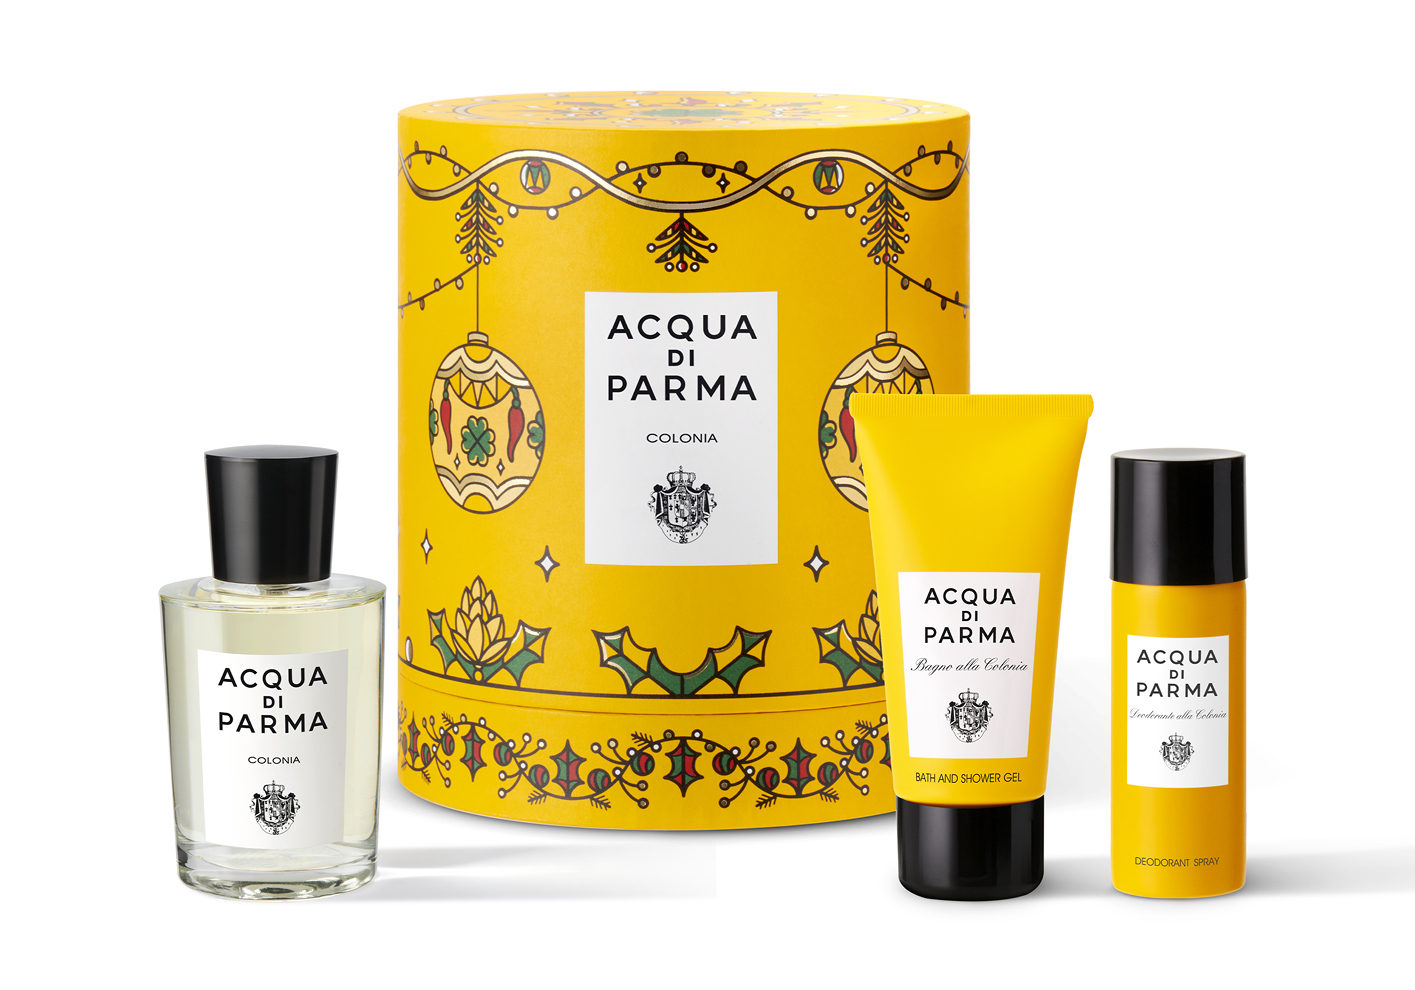 A festive coffret from Acqua di Parma featuring fragrances from the brand's most iconic line, Colonia